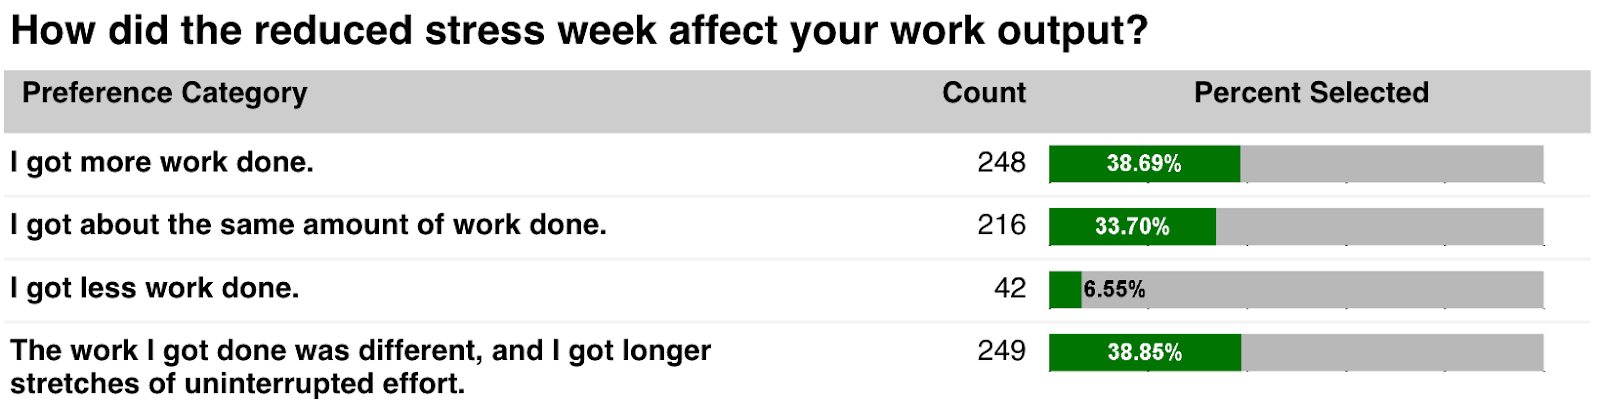 Redfin's reduced stress survey: How did the reduced stress week affect your work output?